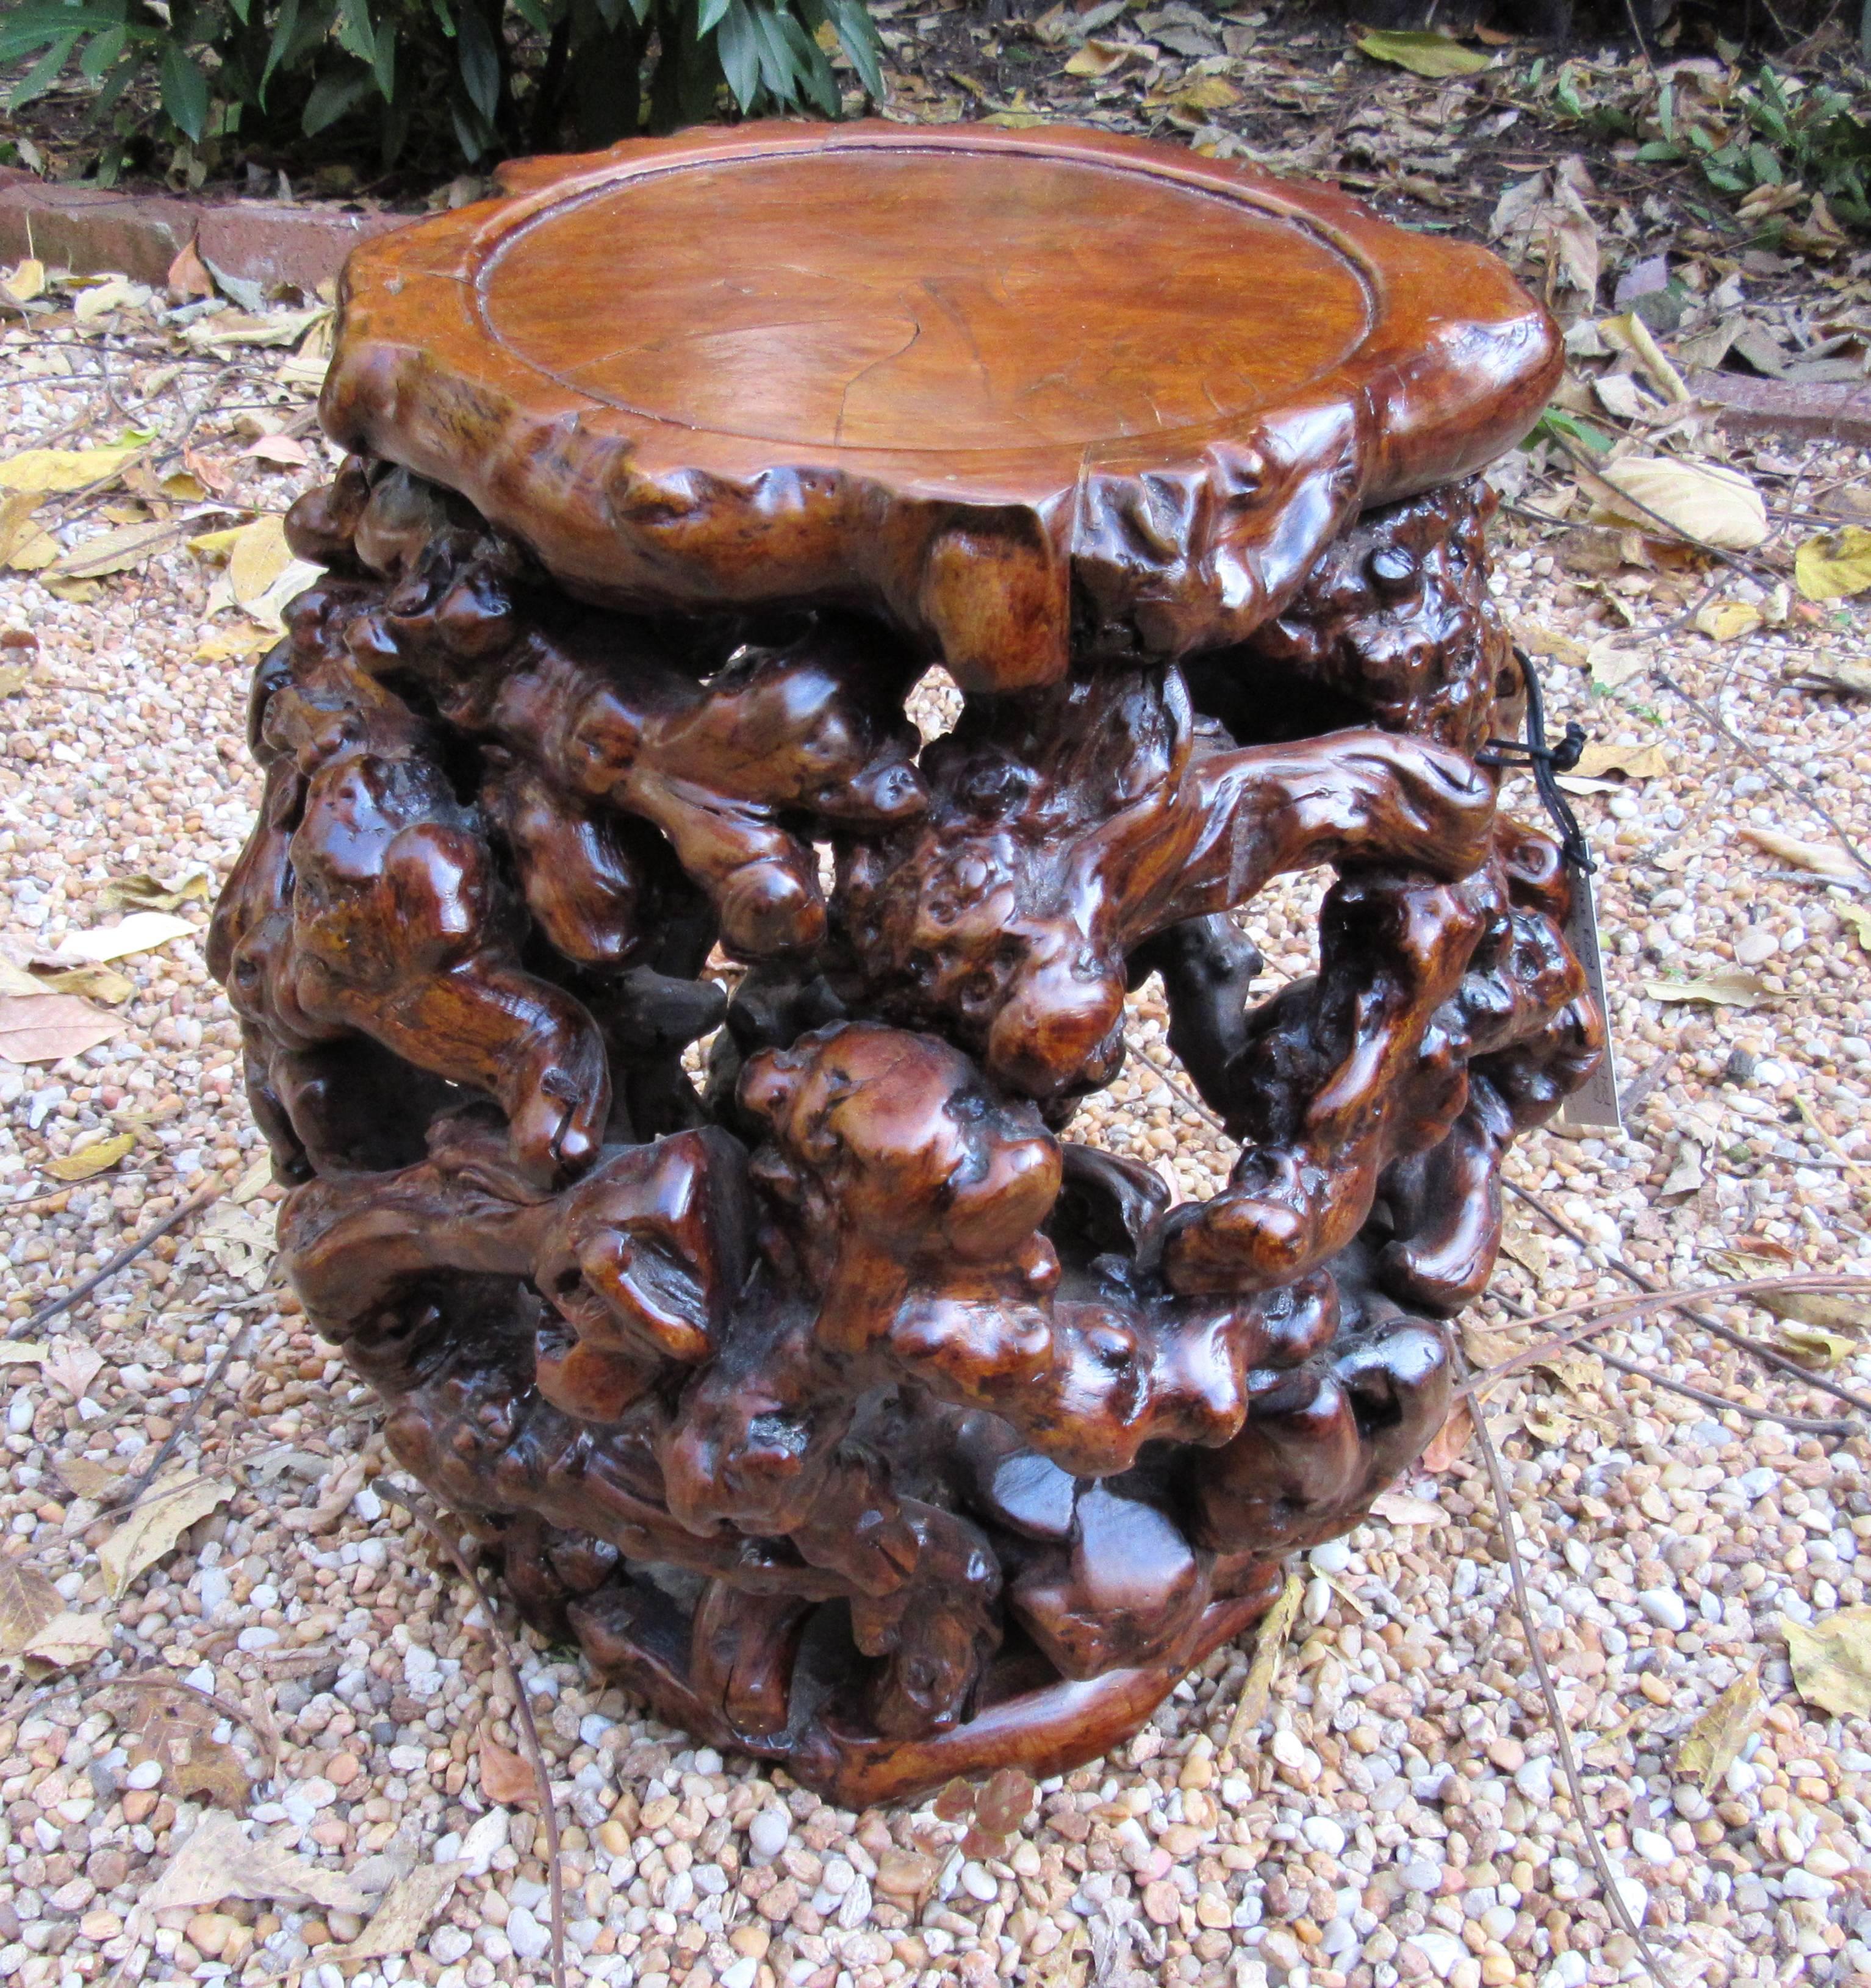 Pair of vine root constructed drum shaped stools or tables with burl wood top. Compelling depth of color and organic design.